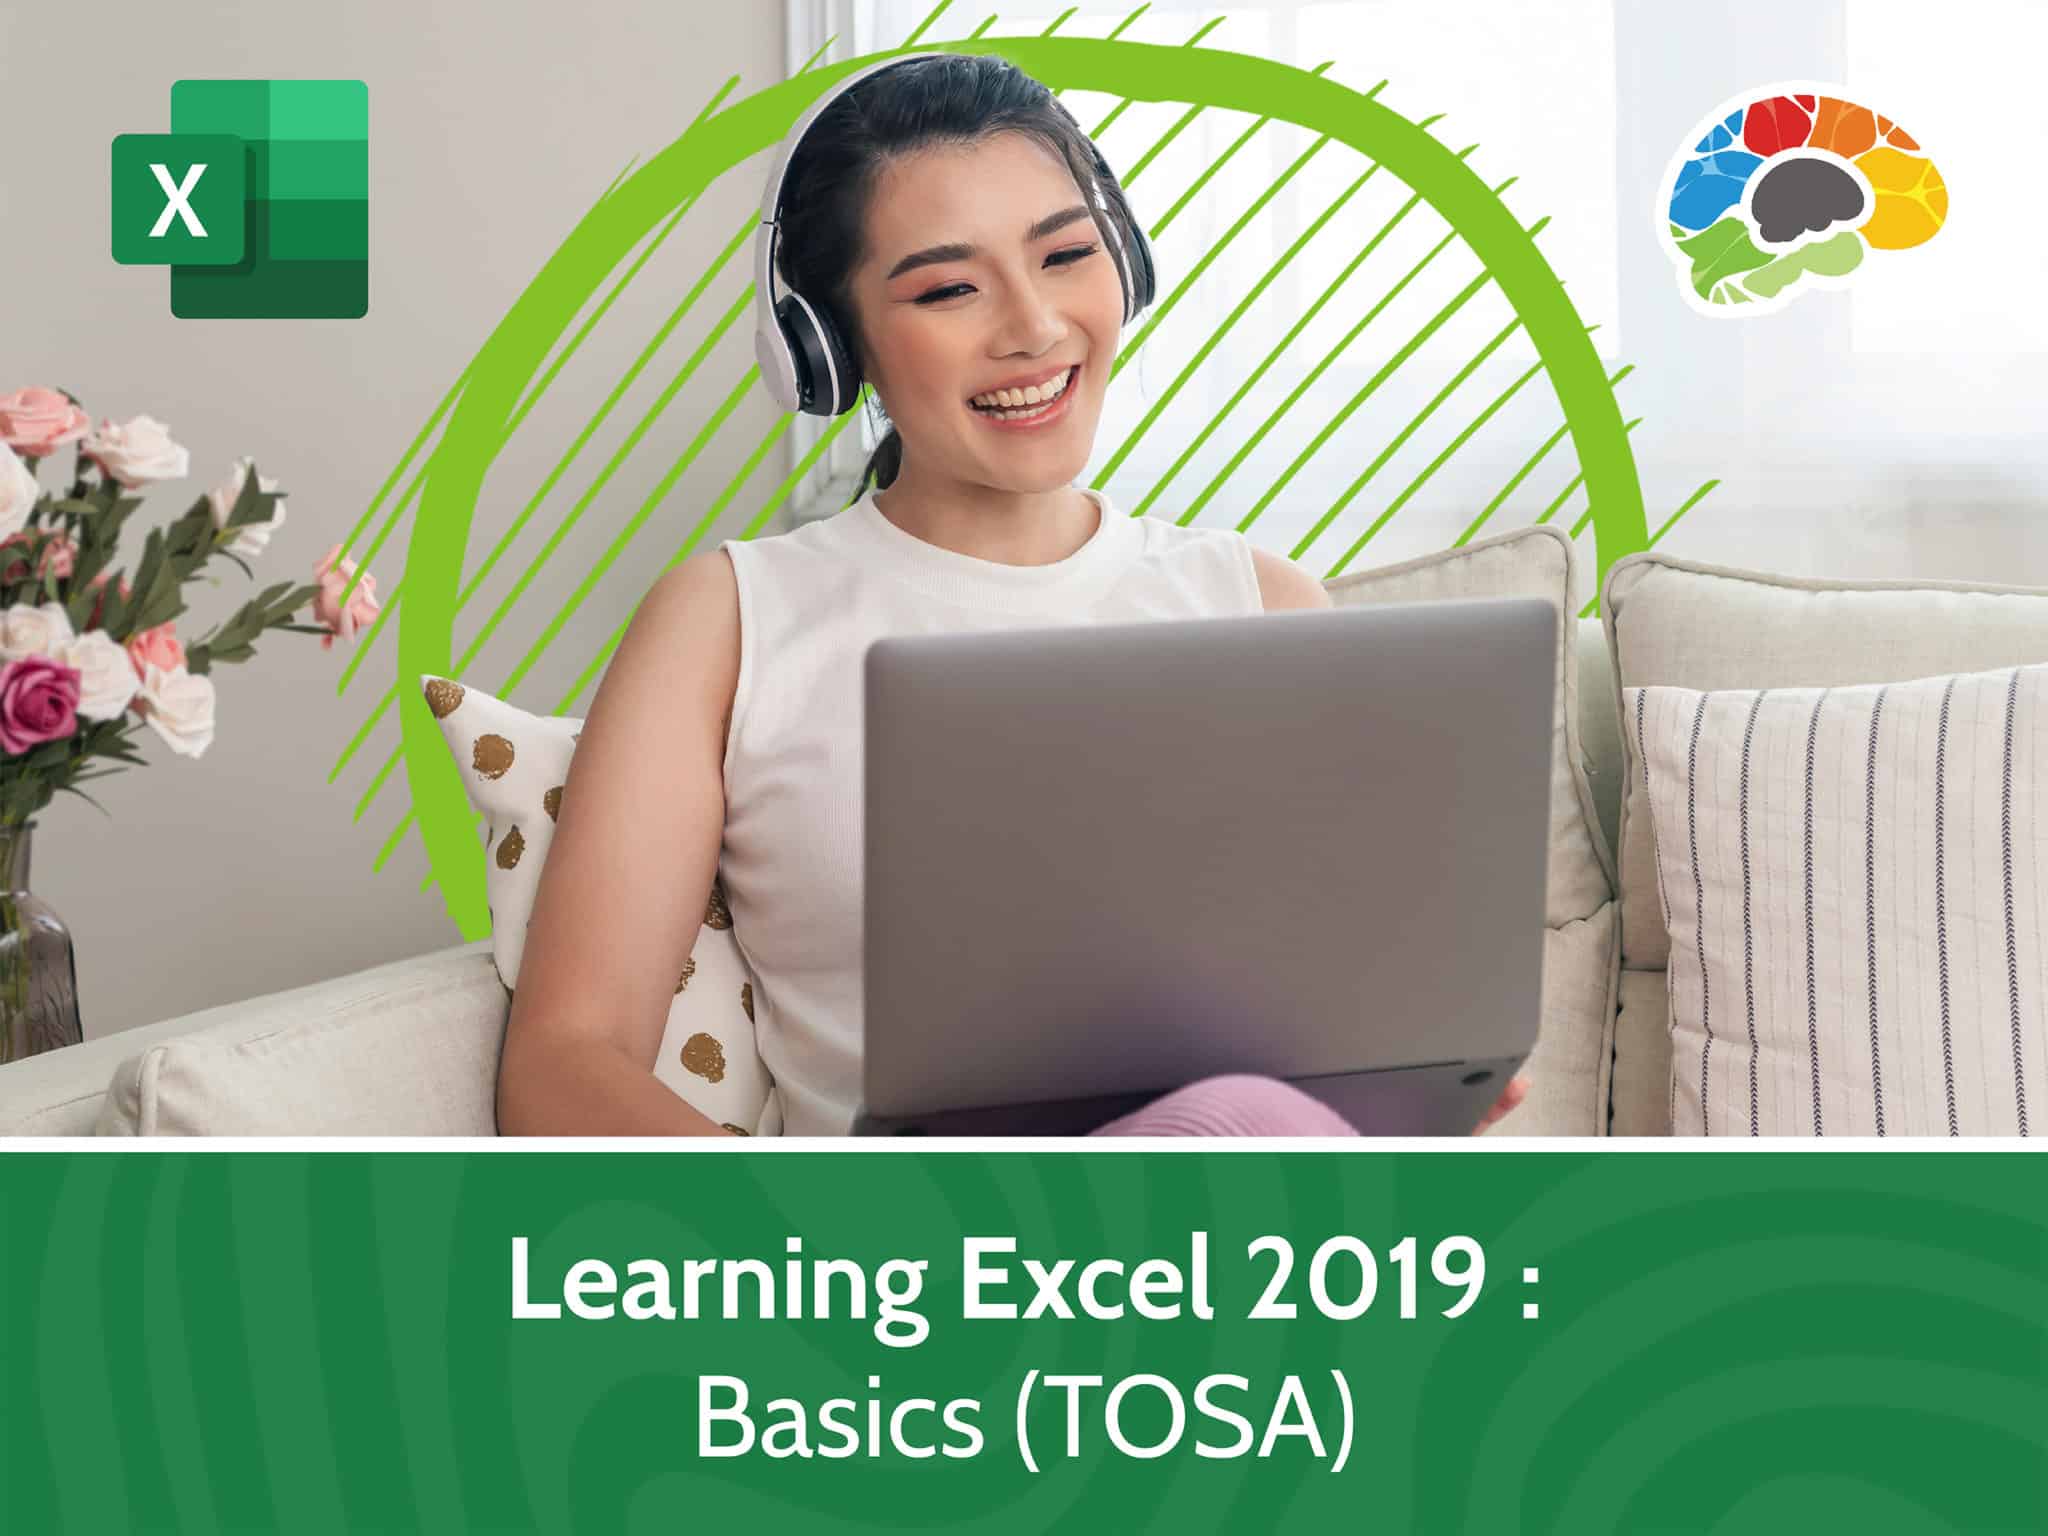 Learning Excel 2019 – Basics TOSA scaled